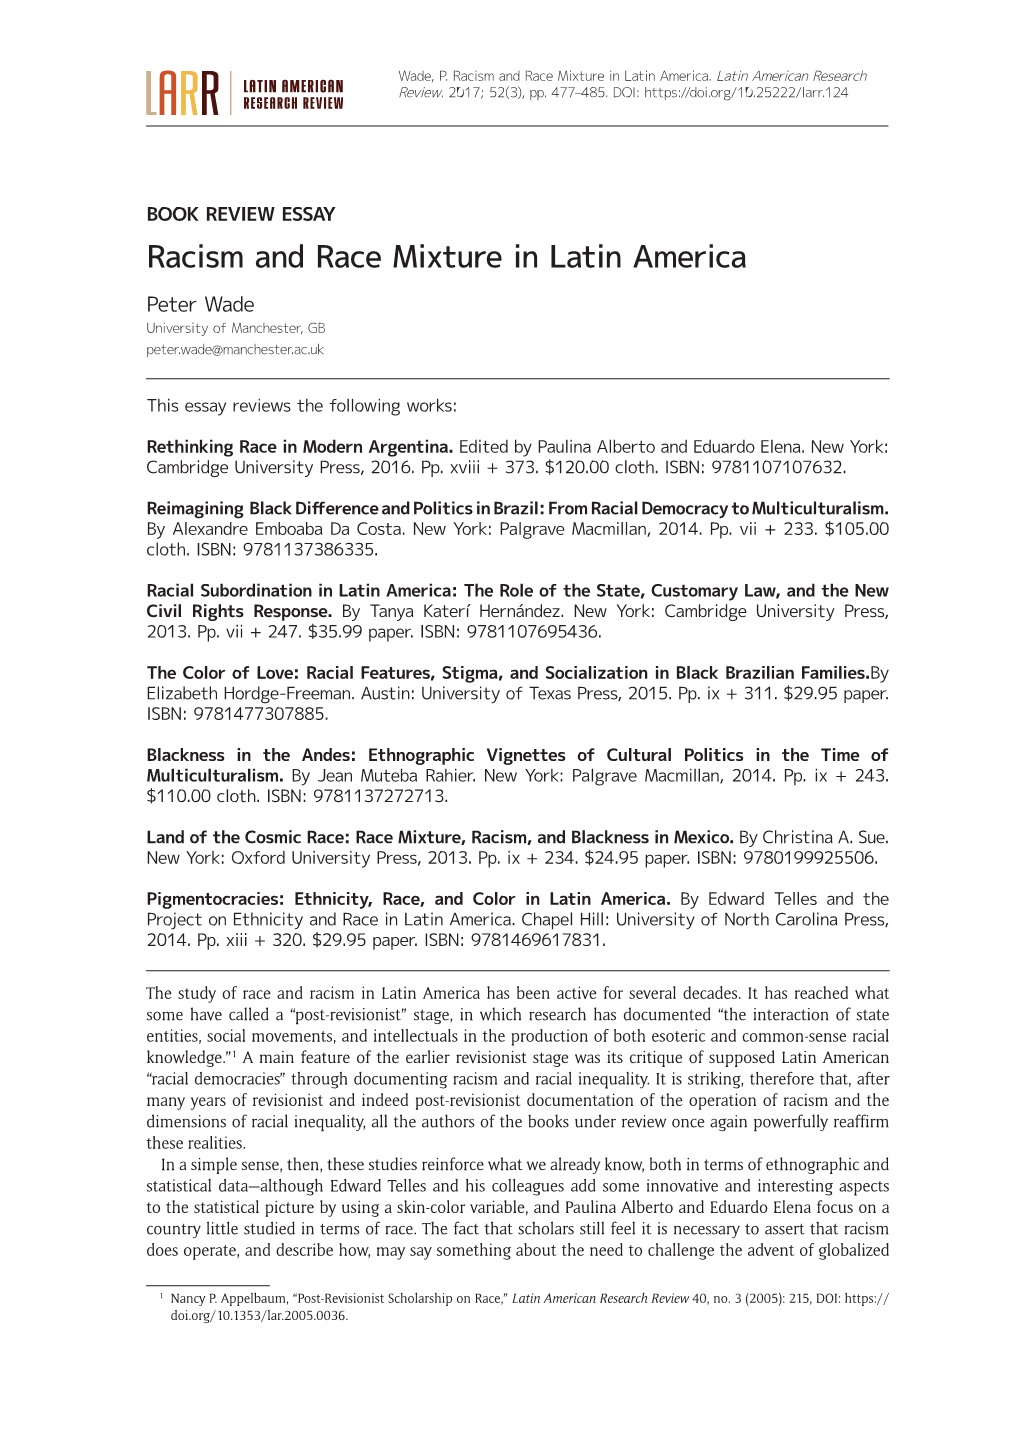 Racism and Race Mixture in Latin America